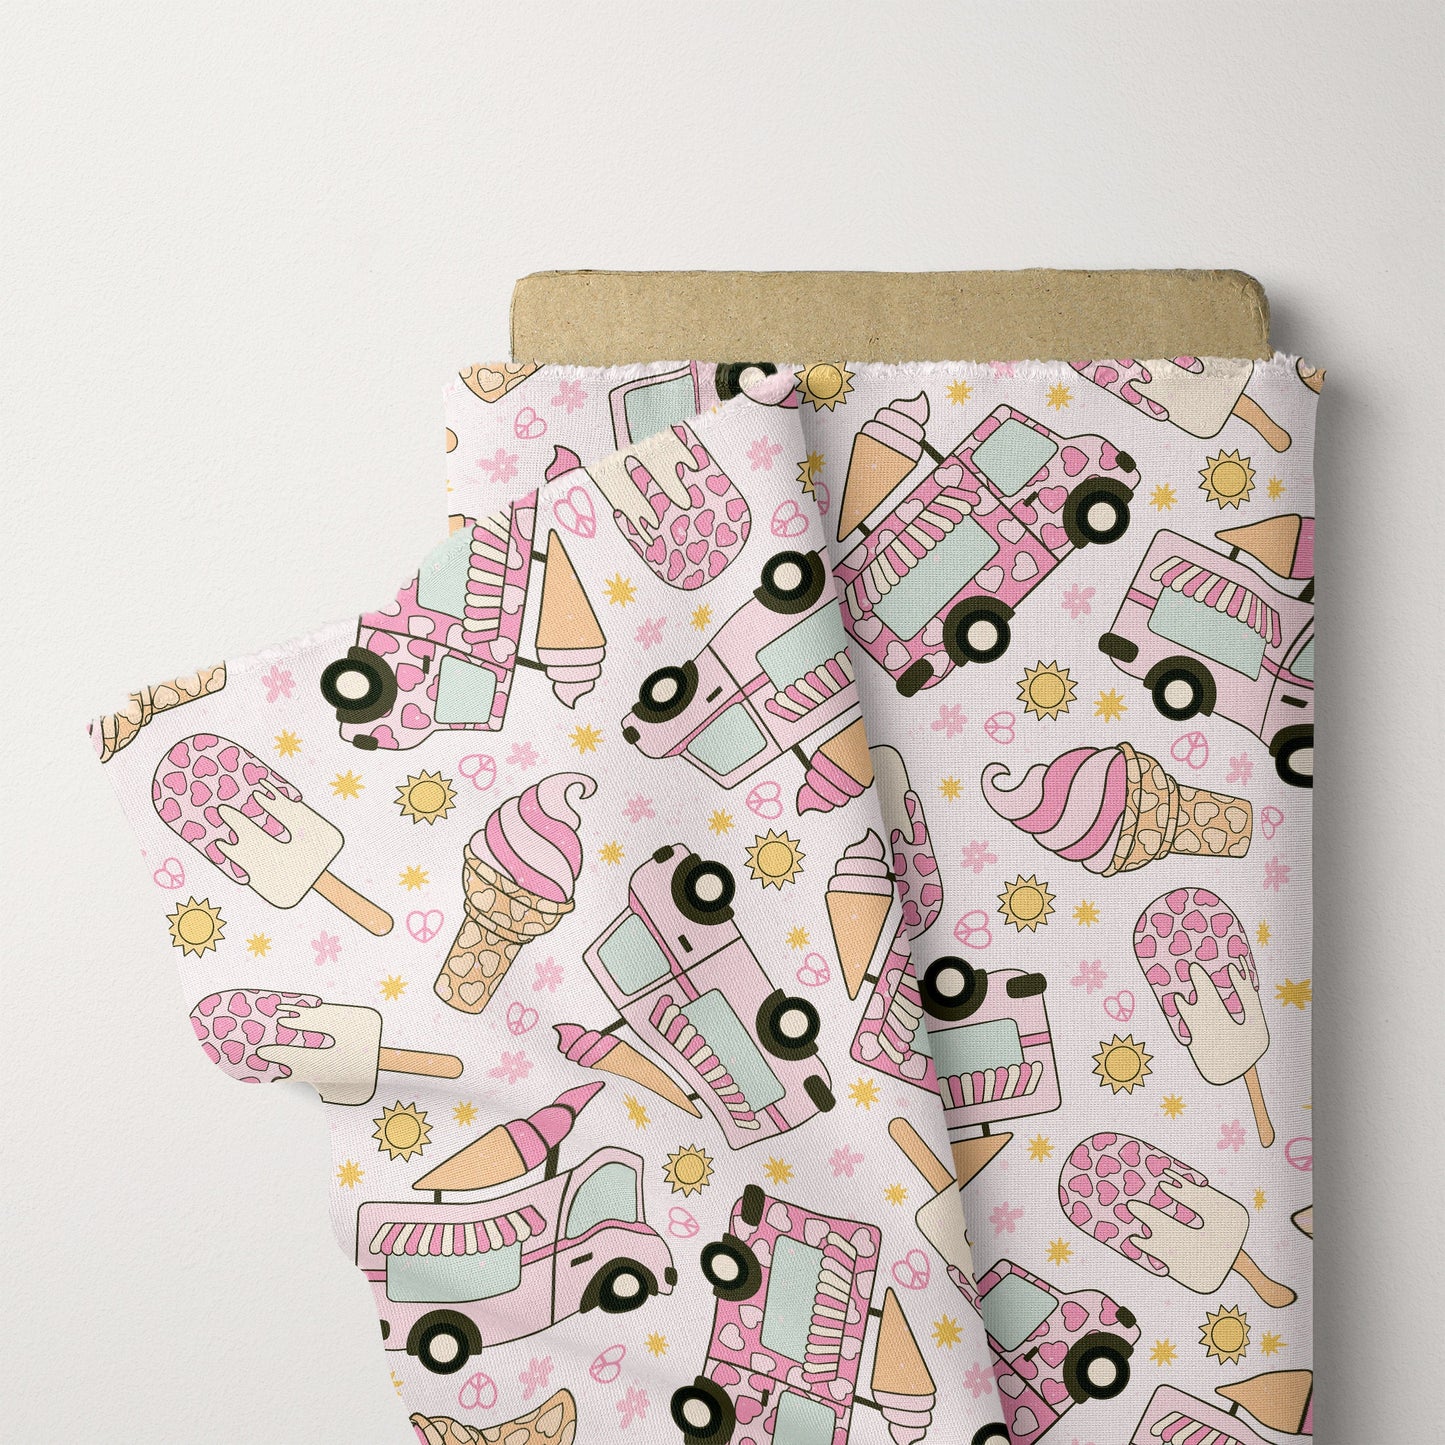 Summer Pattern Ice Cream Truck Seamless Repeat Pattern for Fabric Sublimation